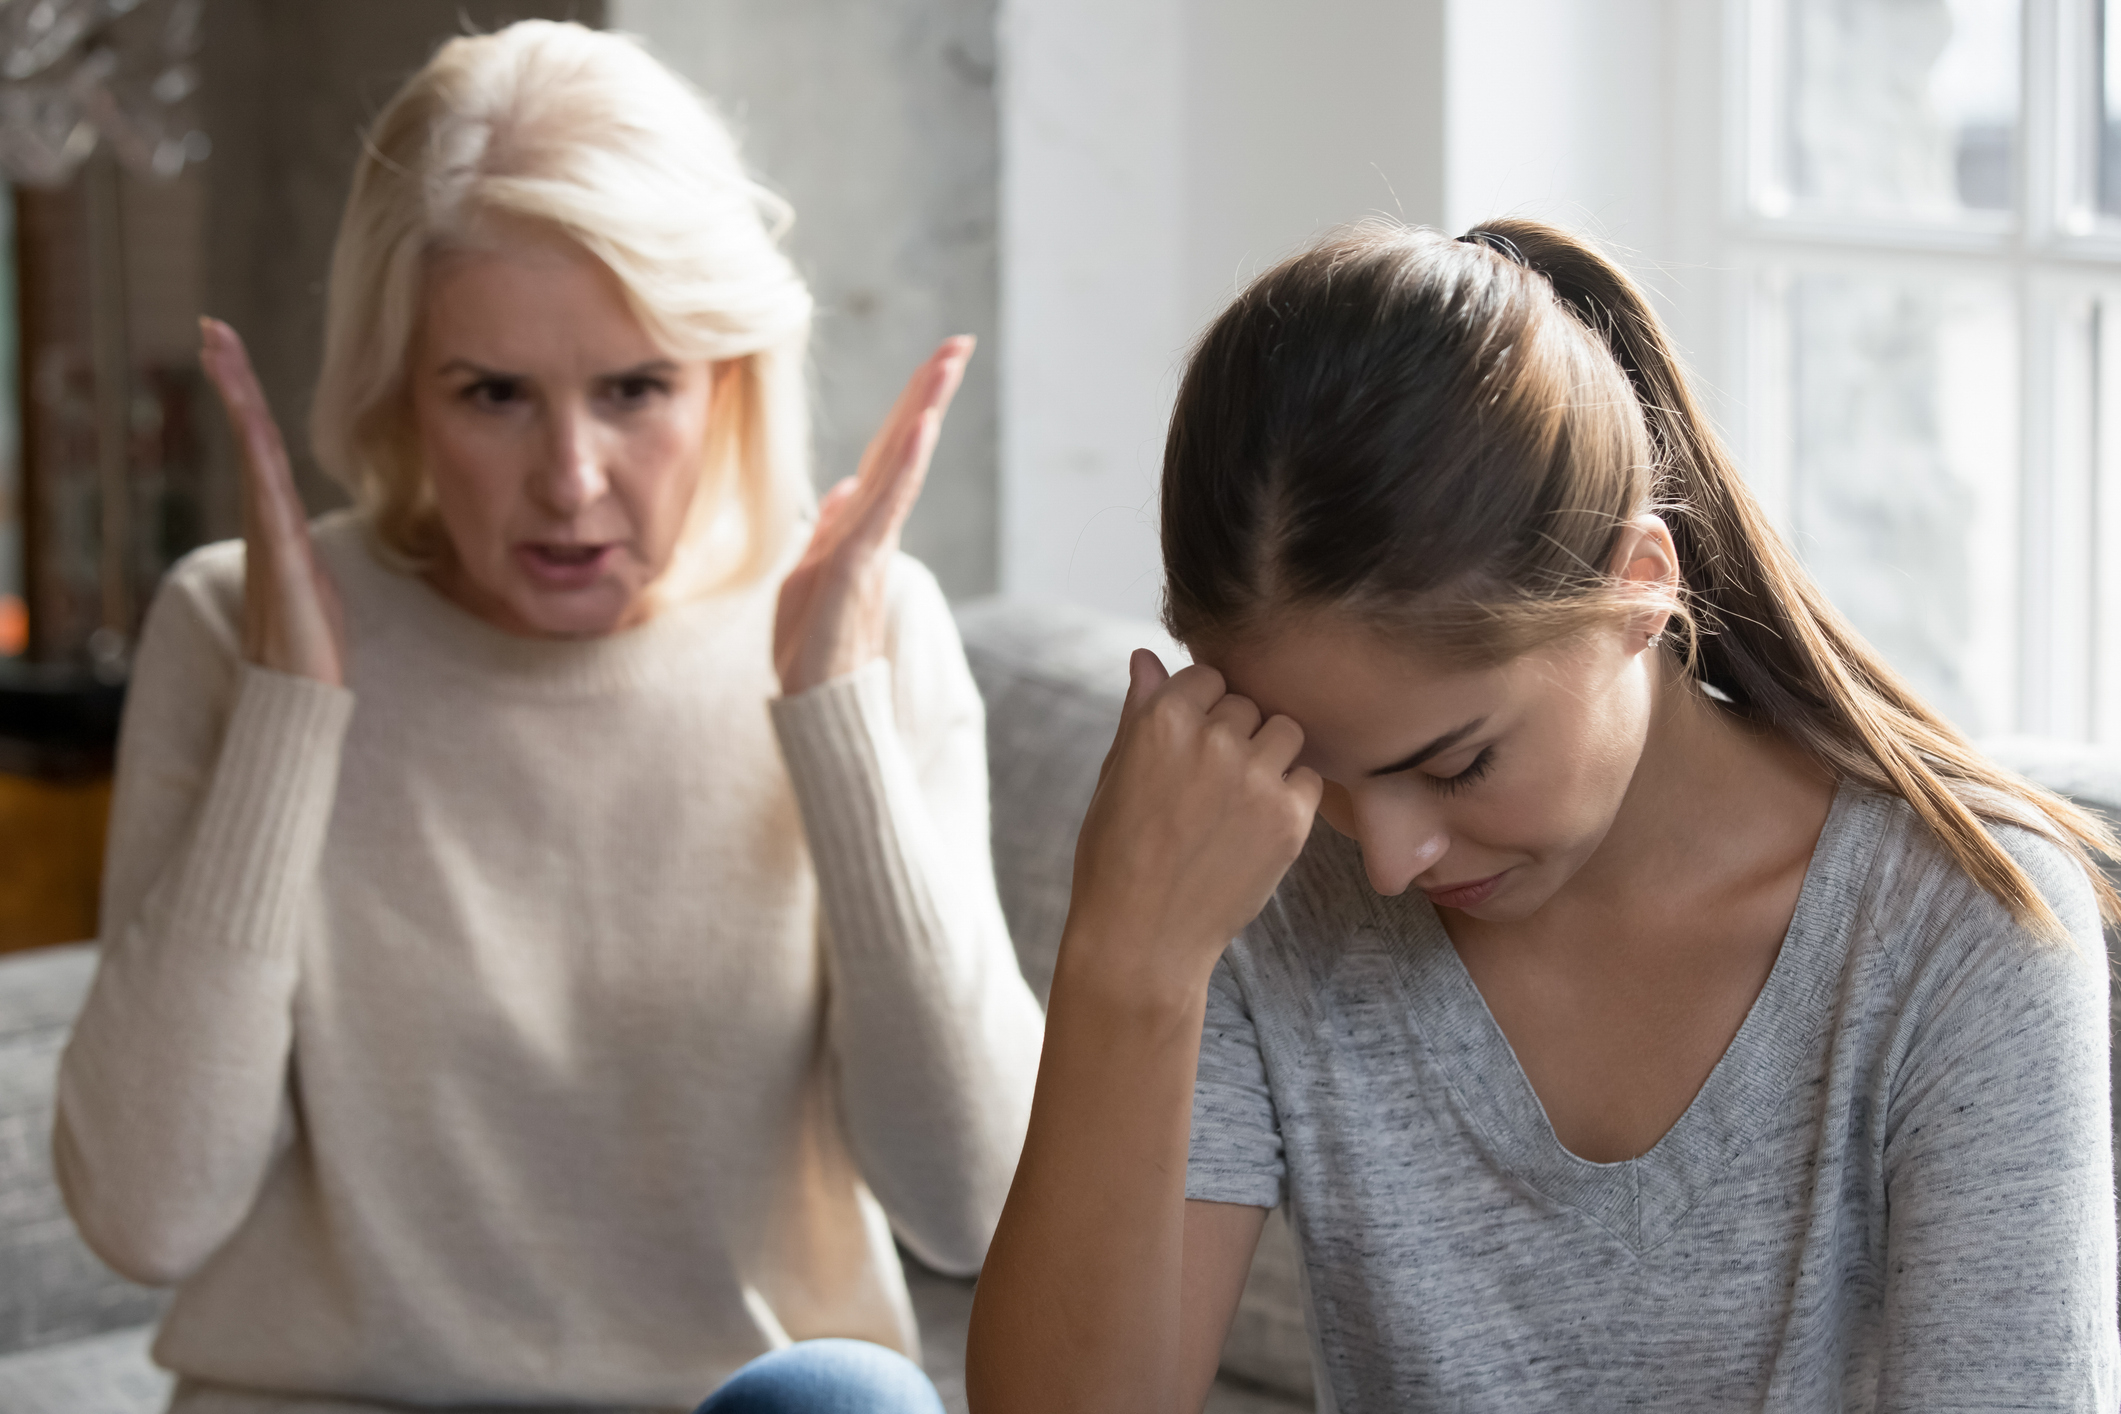 Older woman gesturing in frustration towards a young woman who looks stressed, possibly in a family disagreement